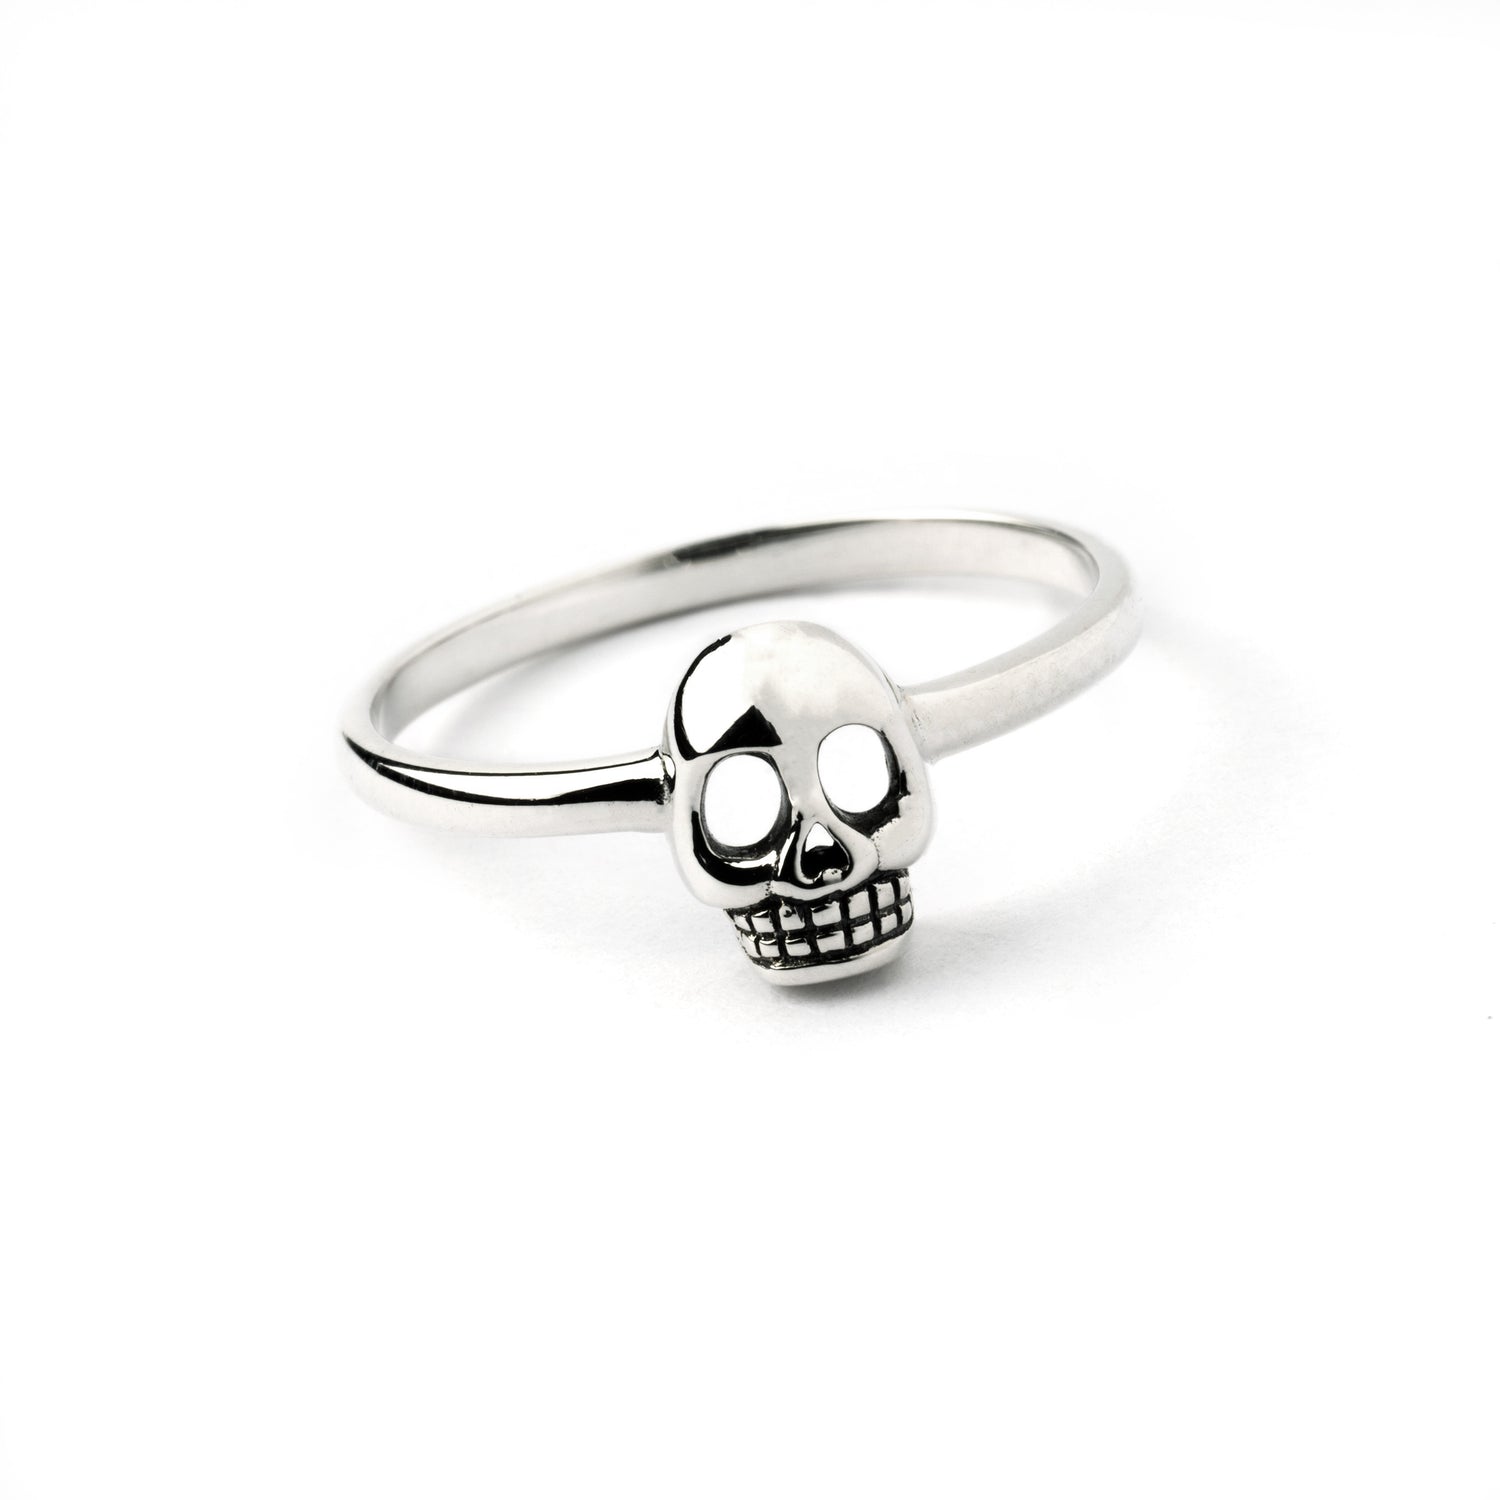 Tiny Silver Skull Ring frontal view